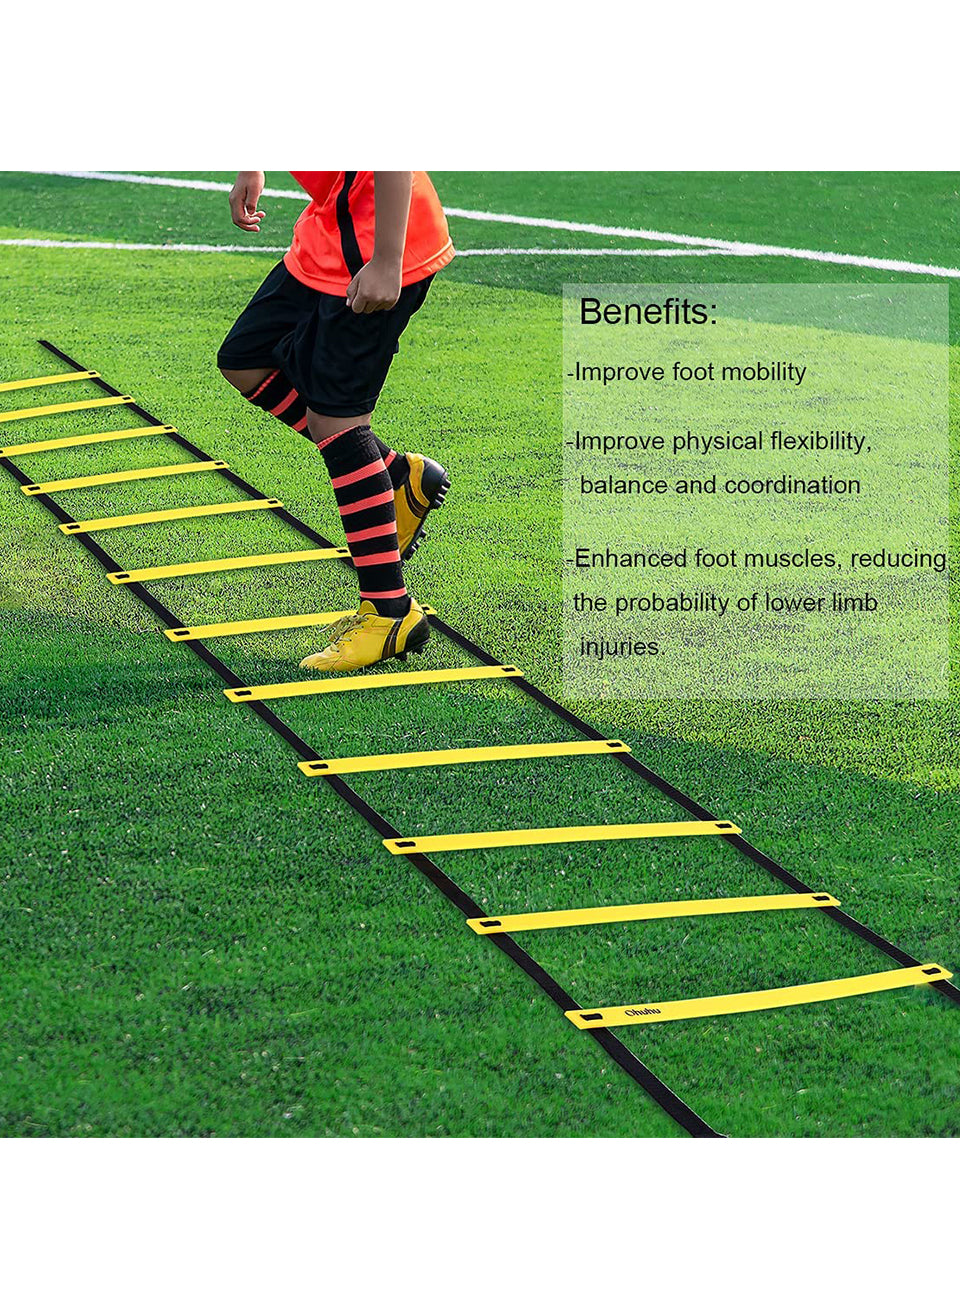 Use sports ladder for agility training in soccer, skating etc